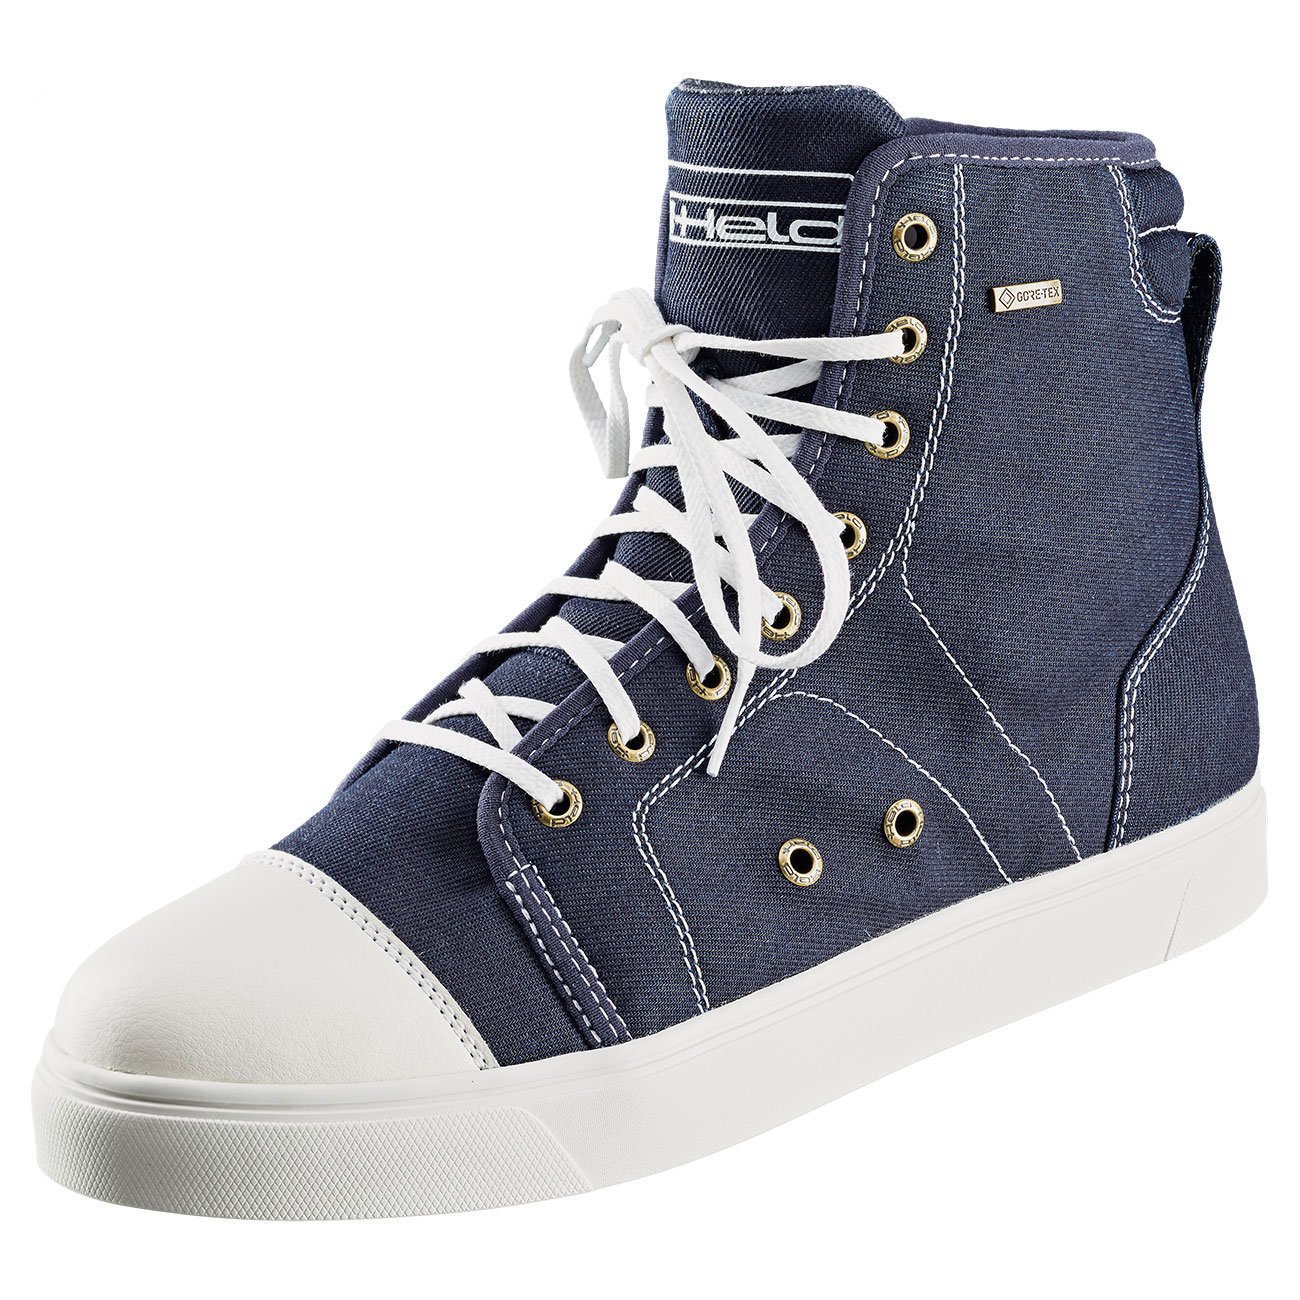 Image of EU Held College Rider GTX Bleu Chaussures Taille 40